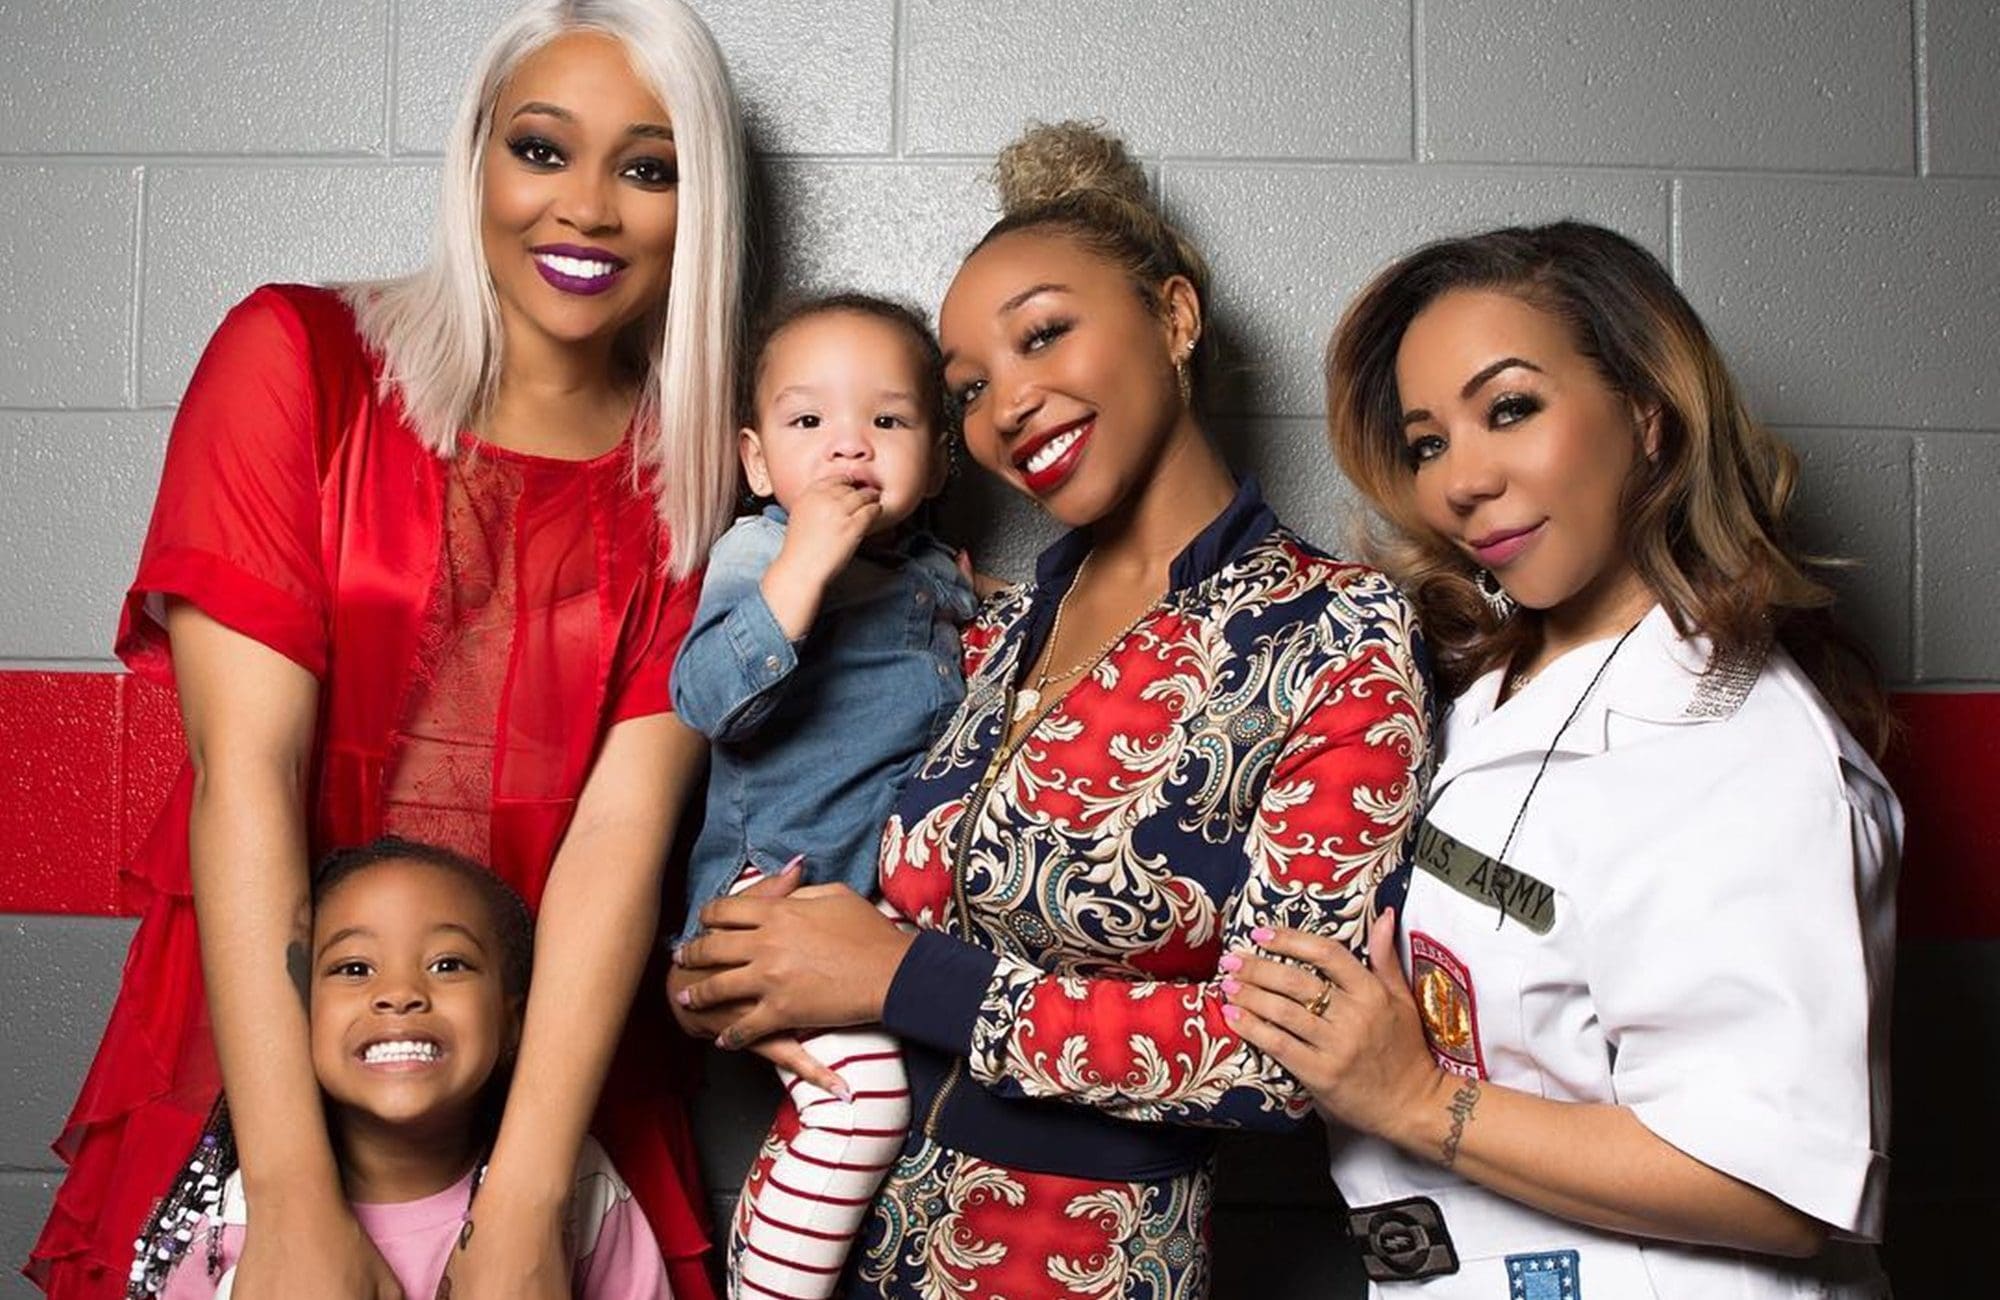 Tiny Harris Shares A Sweet Photo With The Boss Baby, Heiress Harris - Check It Out Below